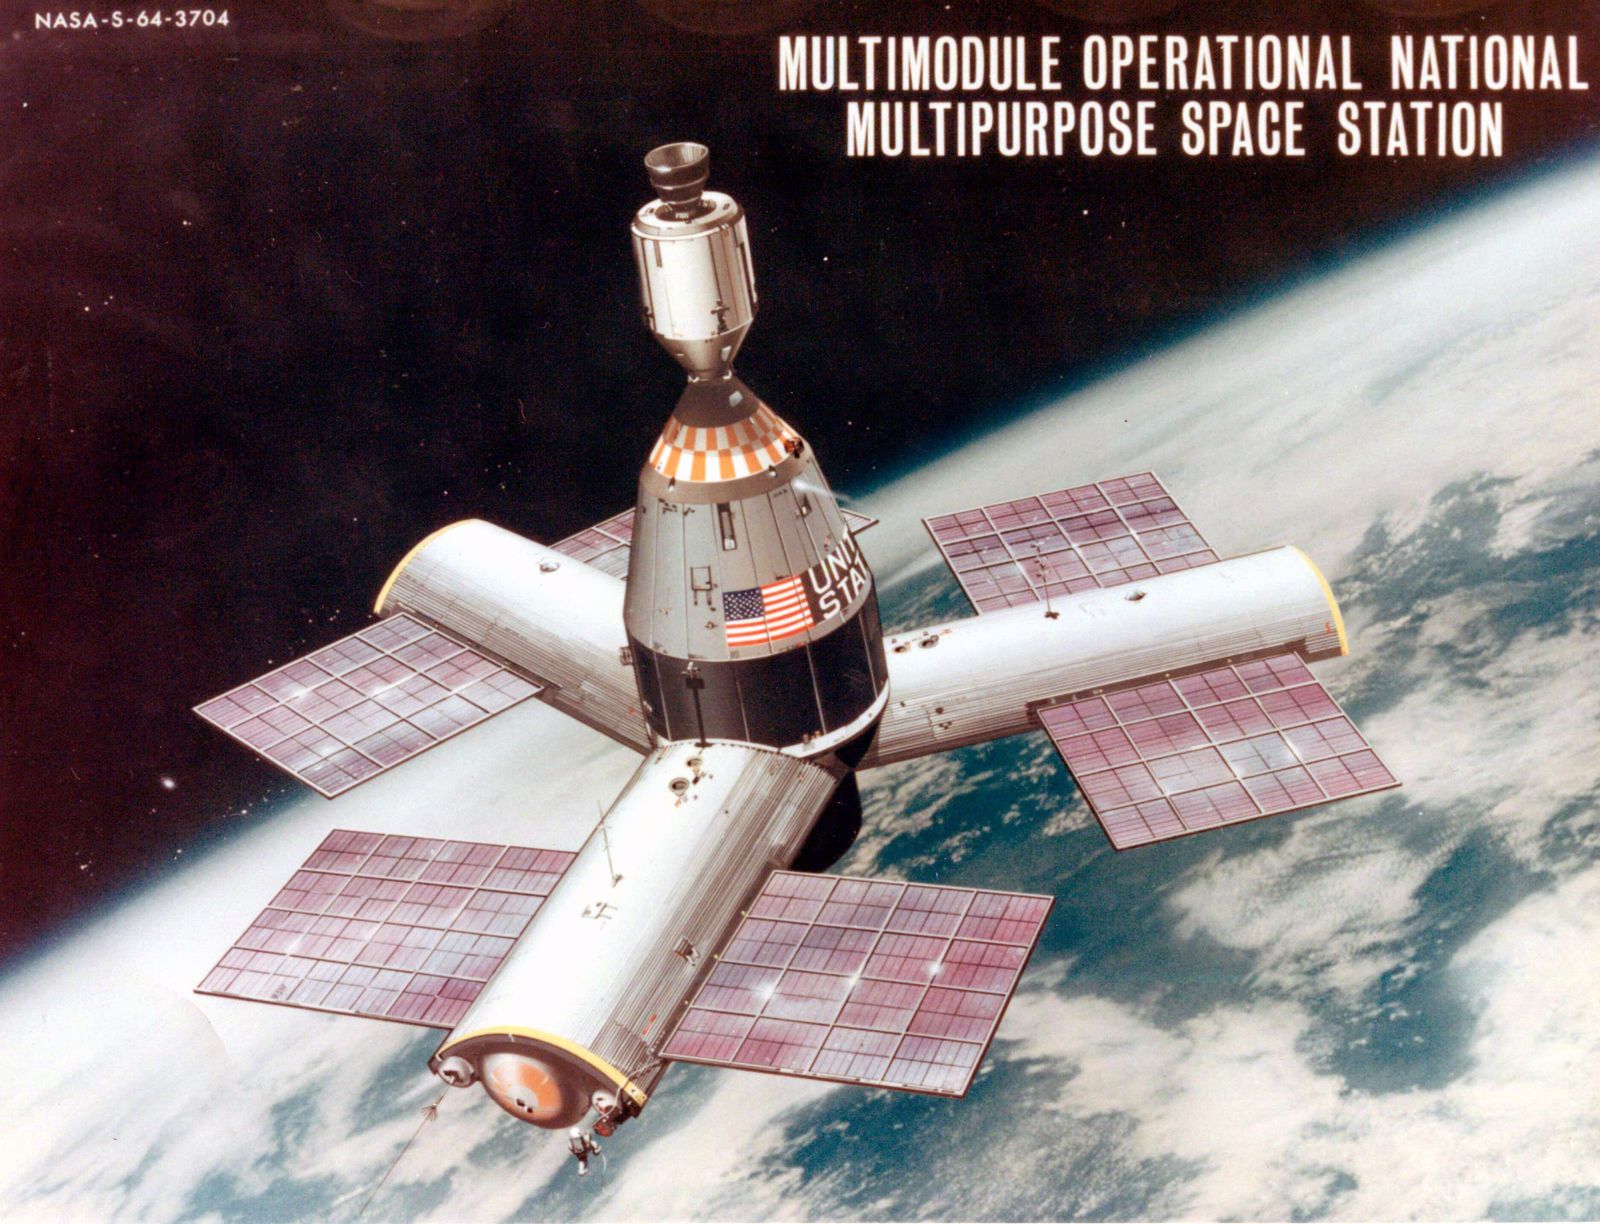 Space station concept images image 36